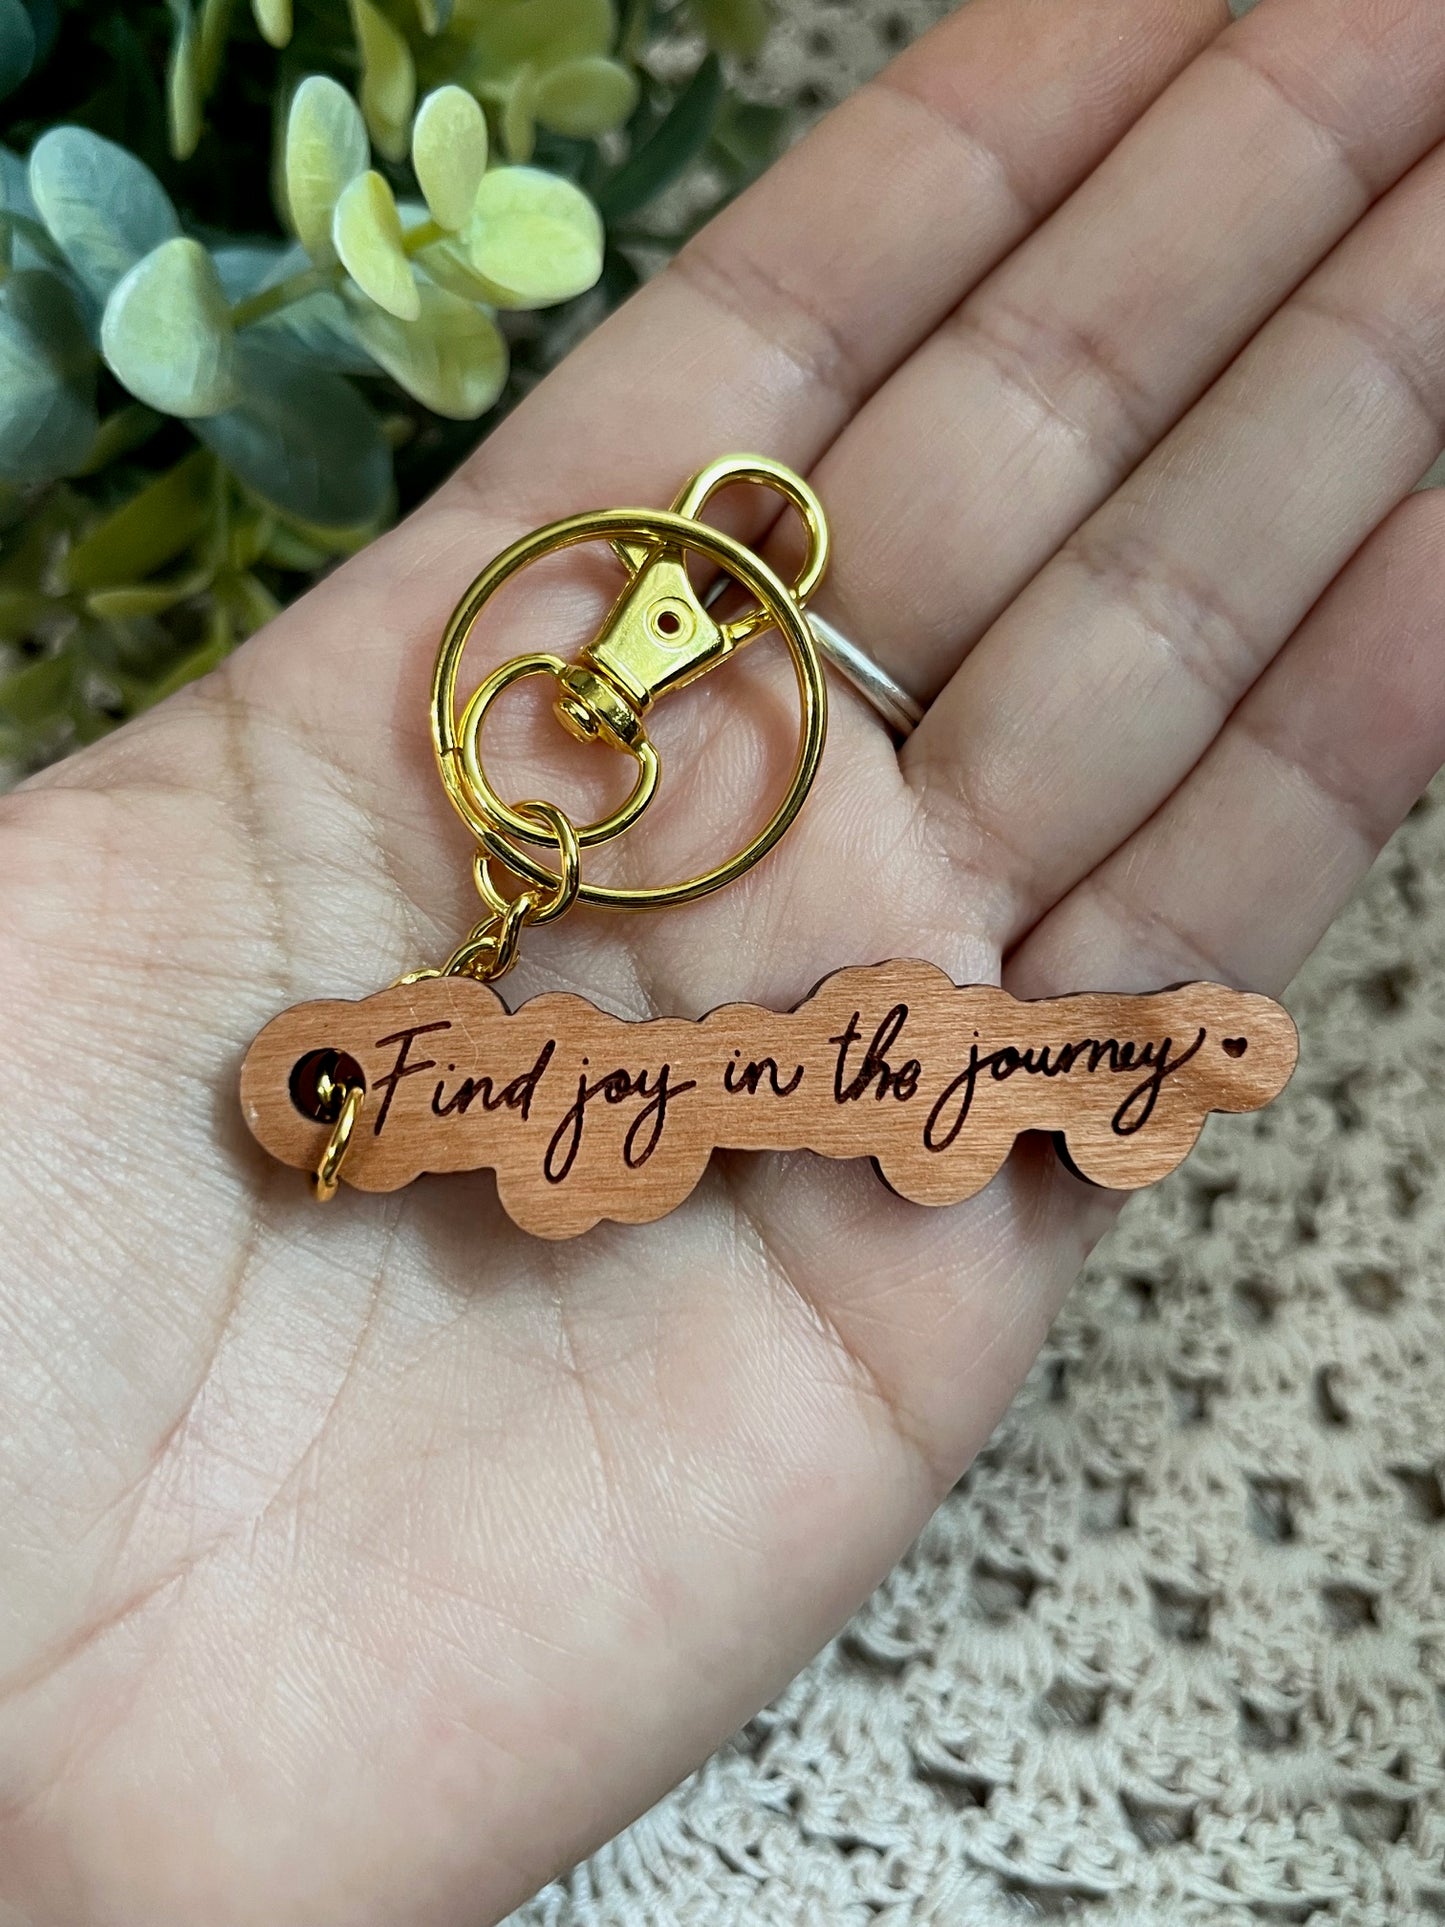 Find joy in the journey - Wood Keychain